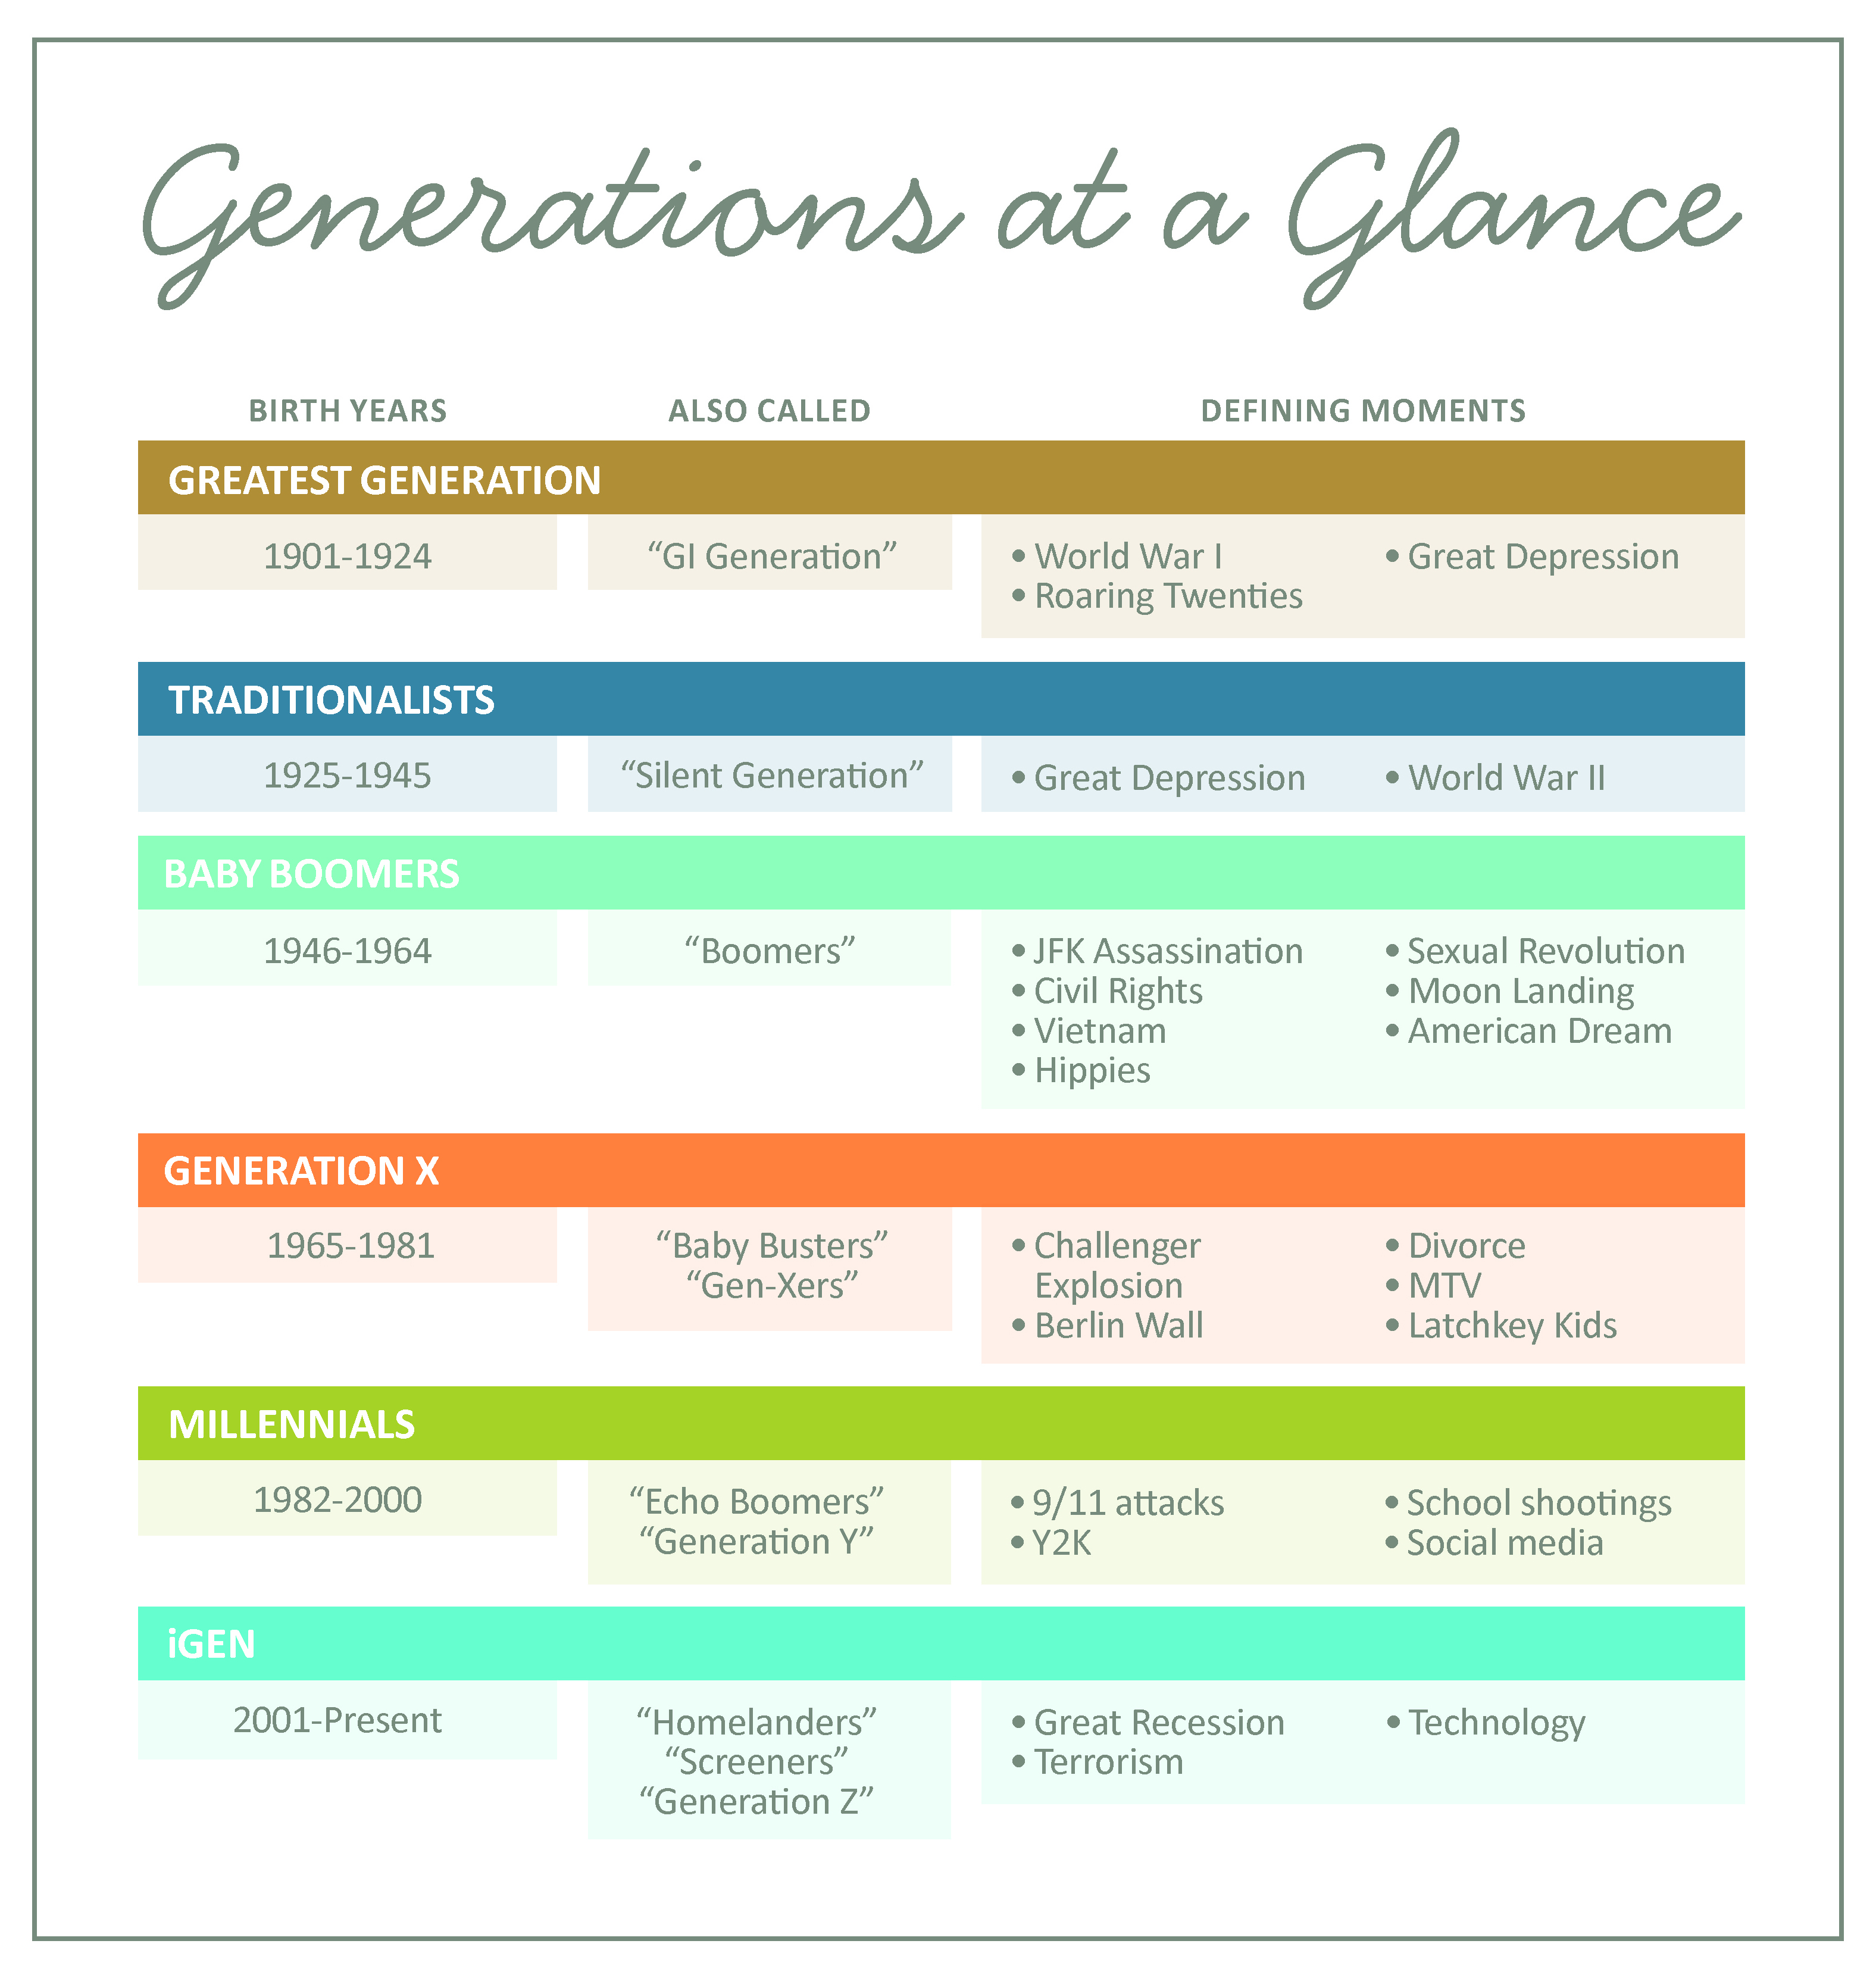 Generations at a Glance